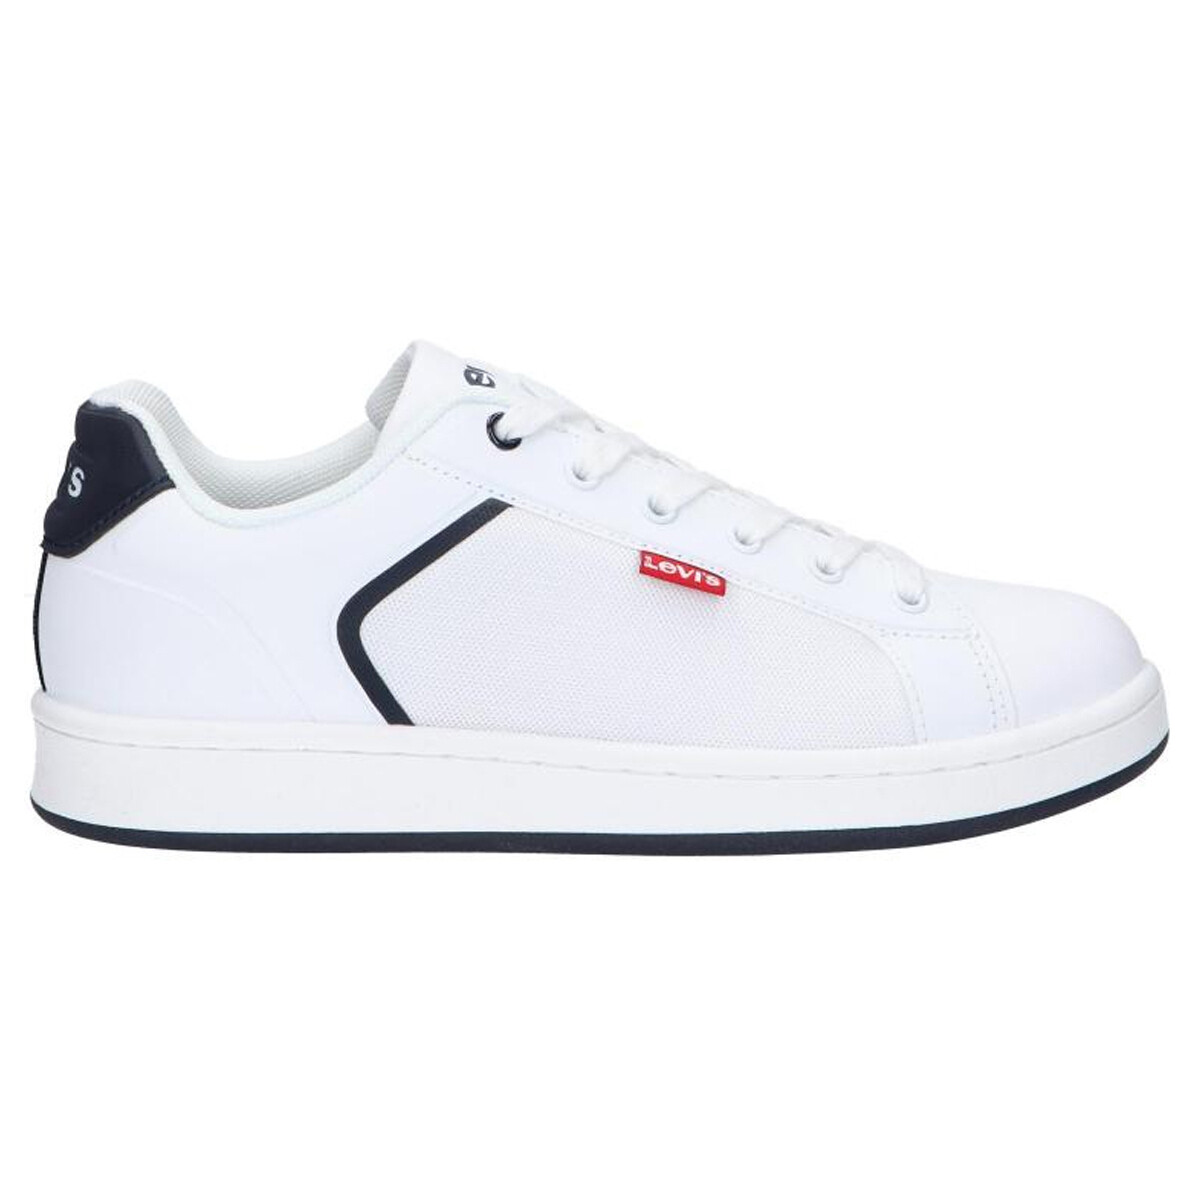 Schuhe Kinder Sneaker Levi's VAVE0038S-0061 Weiss